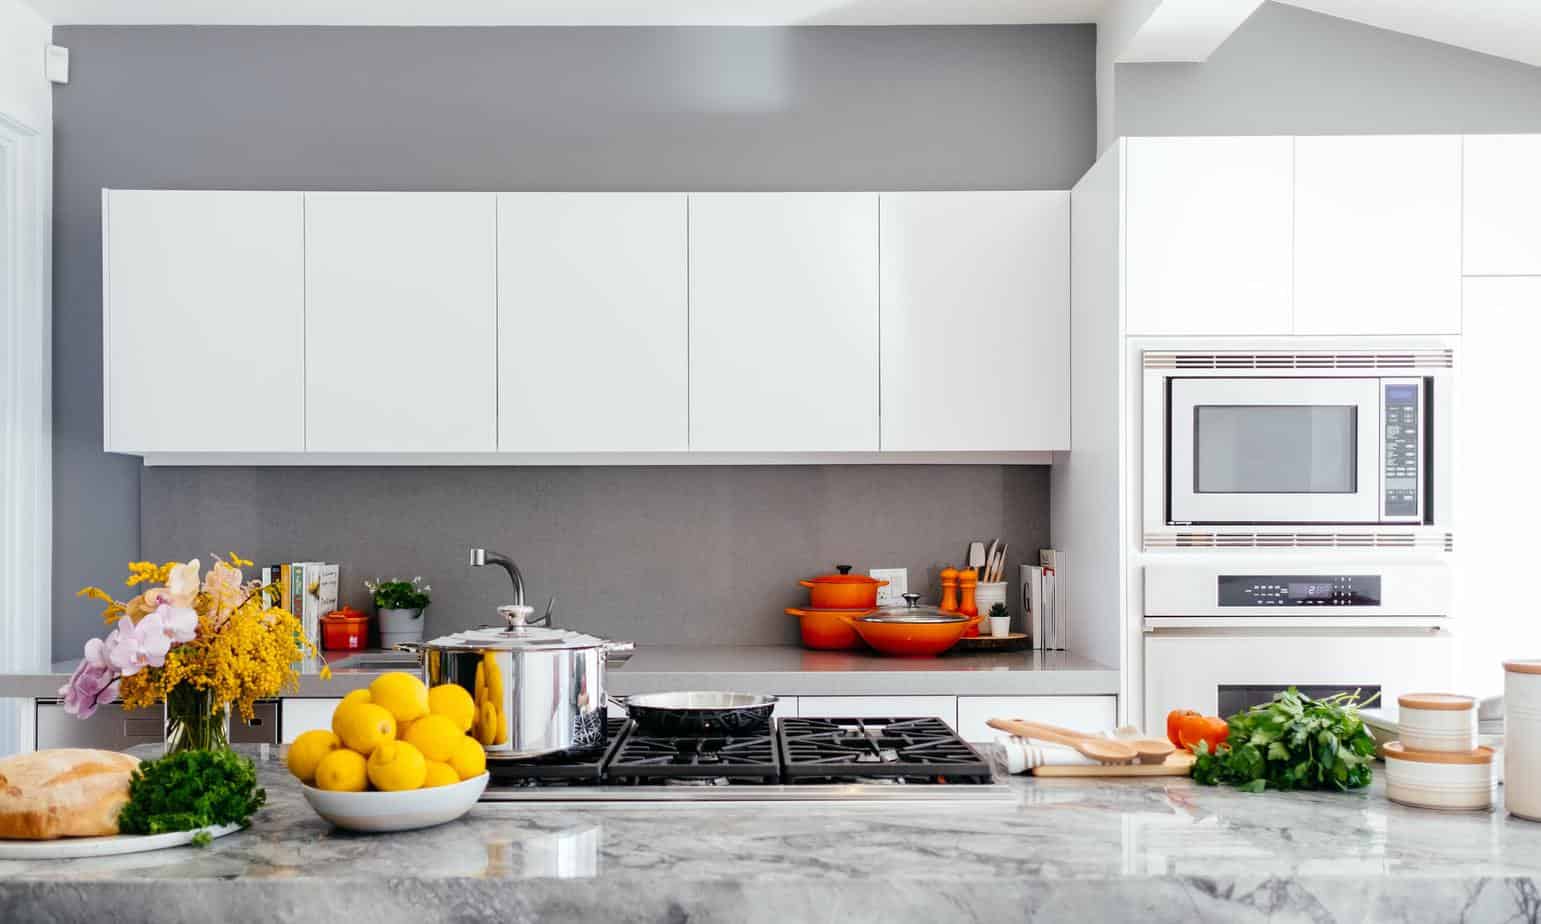 How do I combine countertops in my kitchen? Proven tips